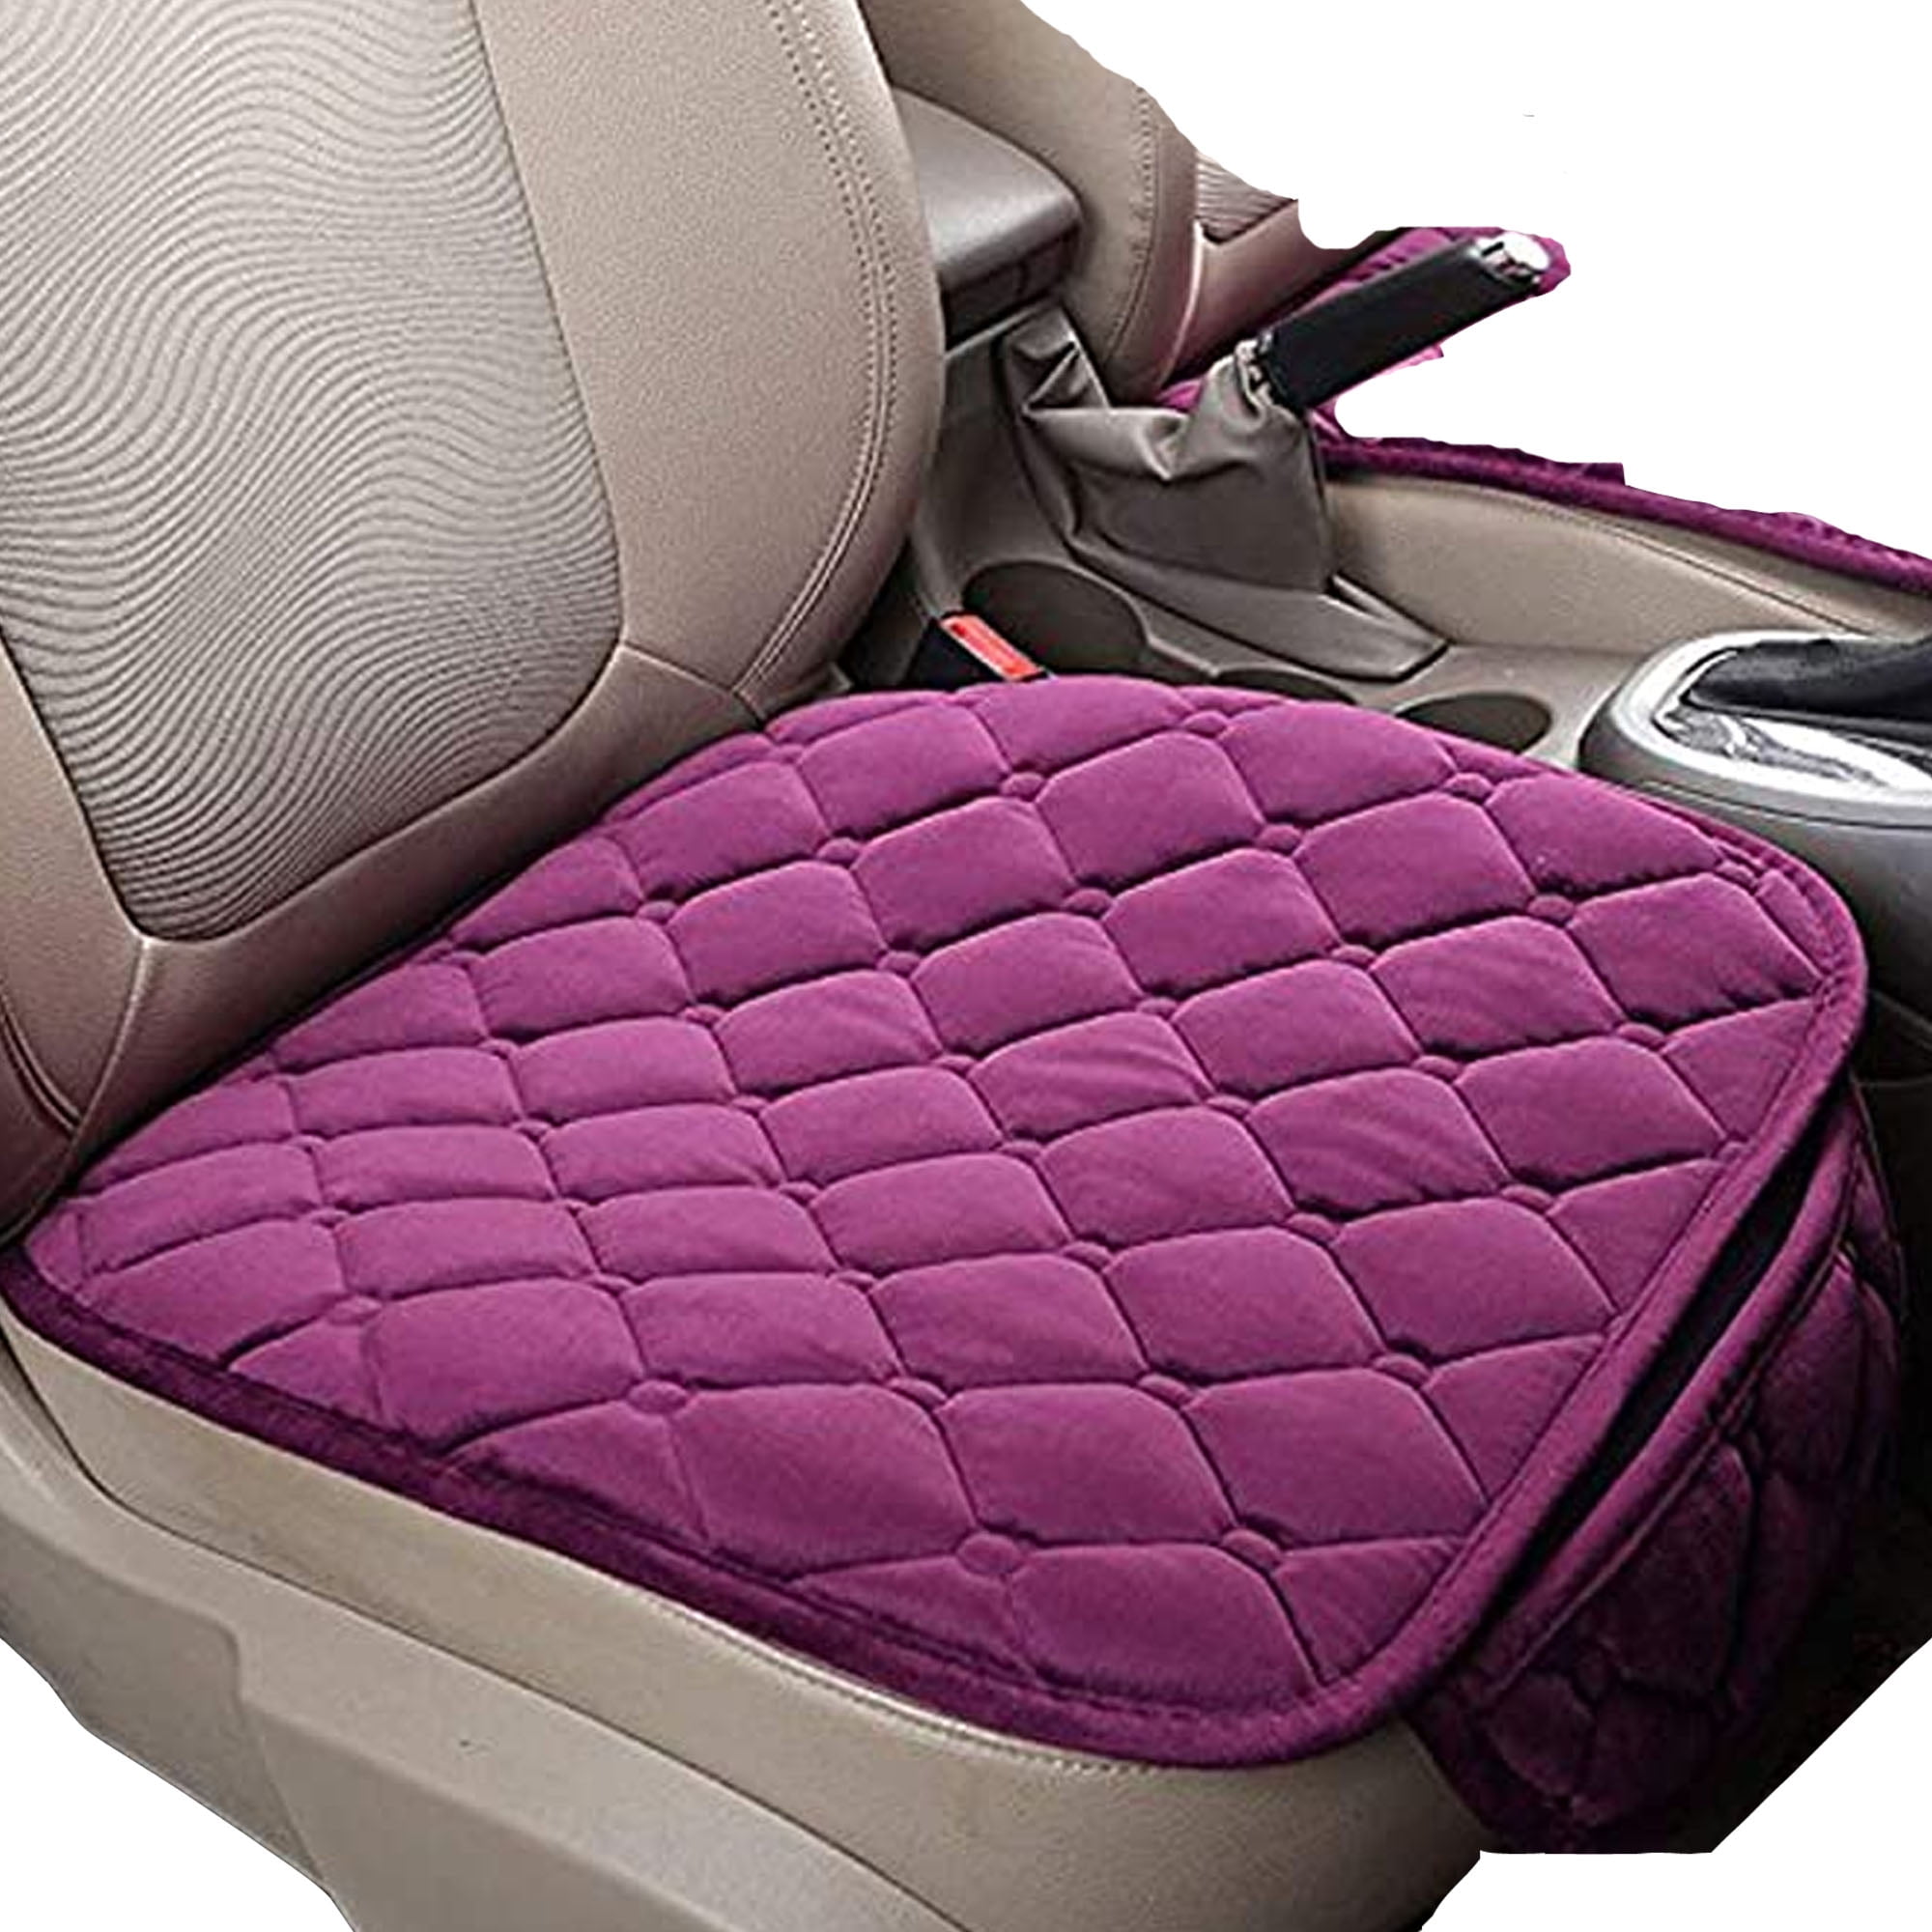 Plush Fabric Car Seat Cover Front Rear Cushion Breathable